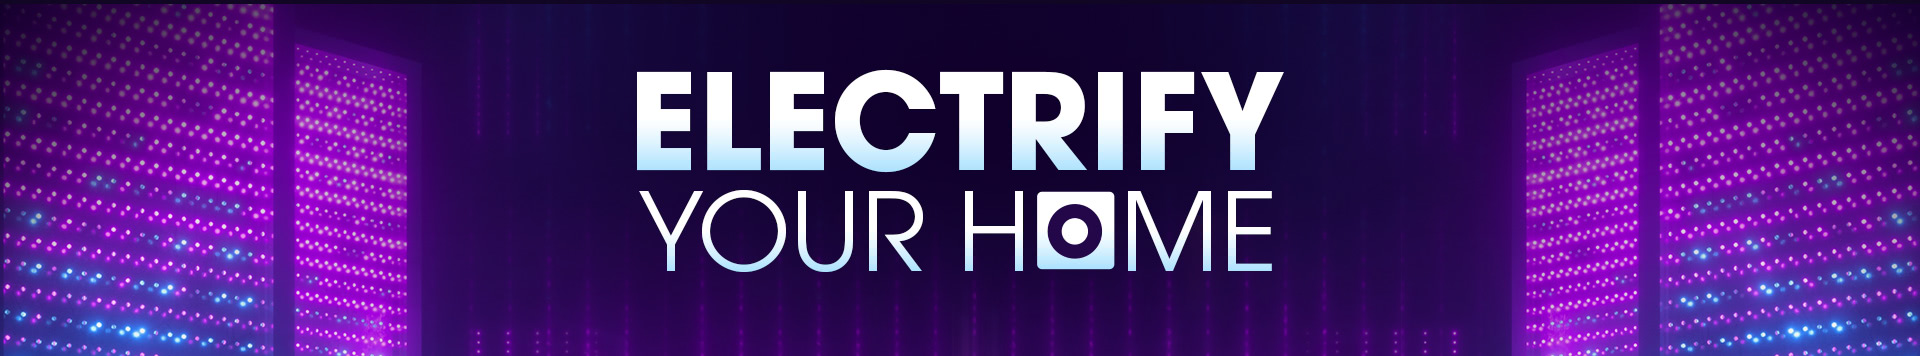 ELECTRIFY YOUR HOME